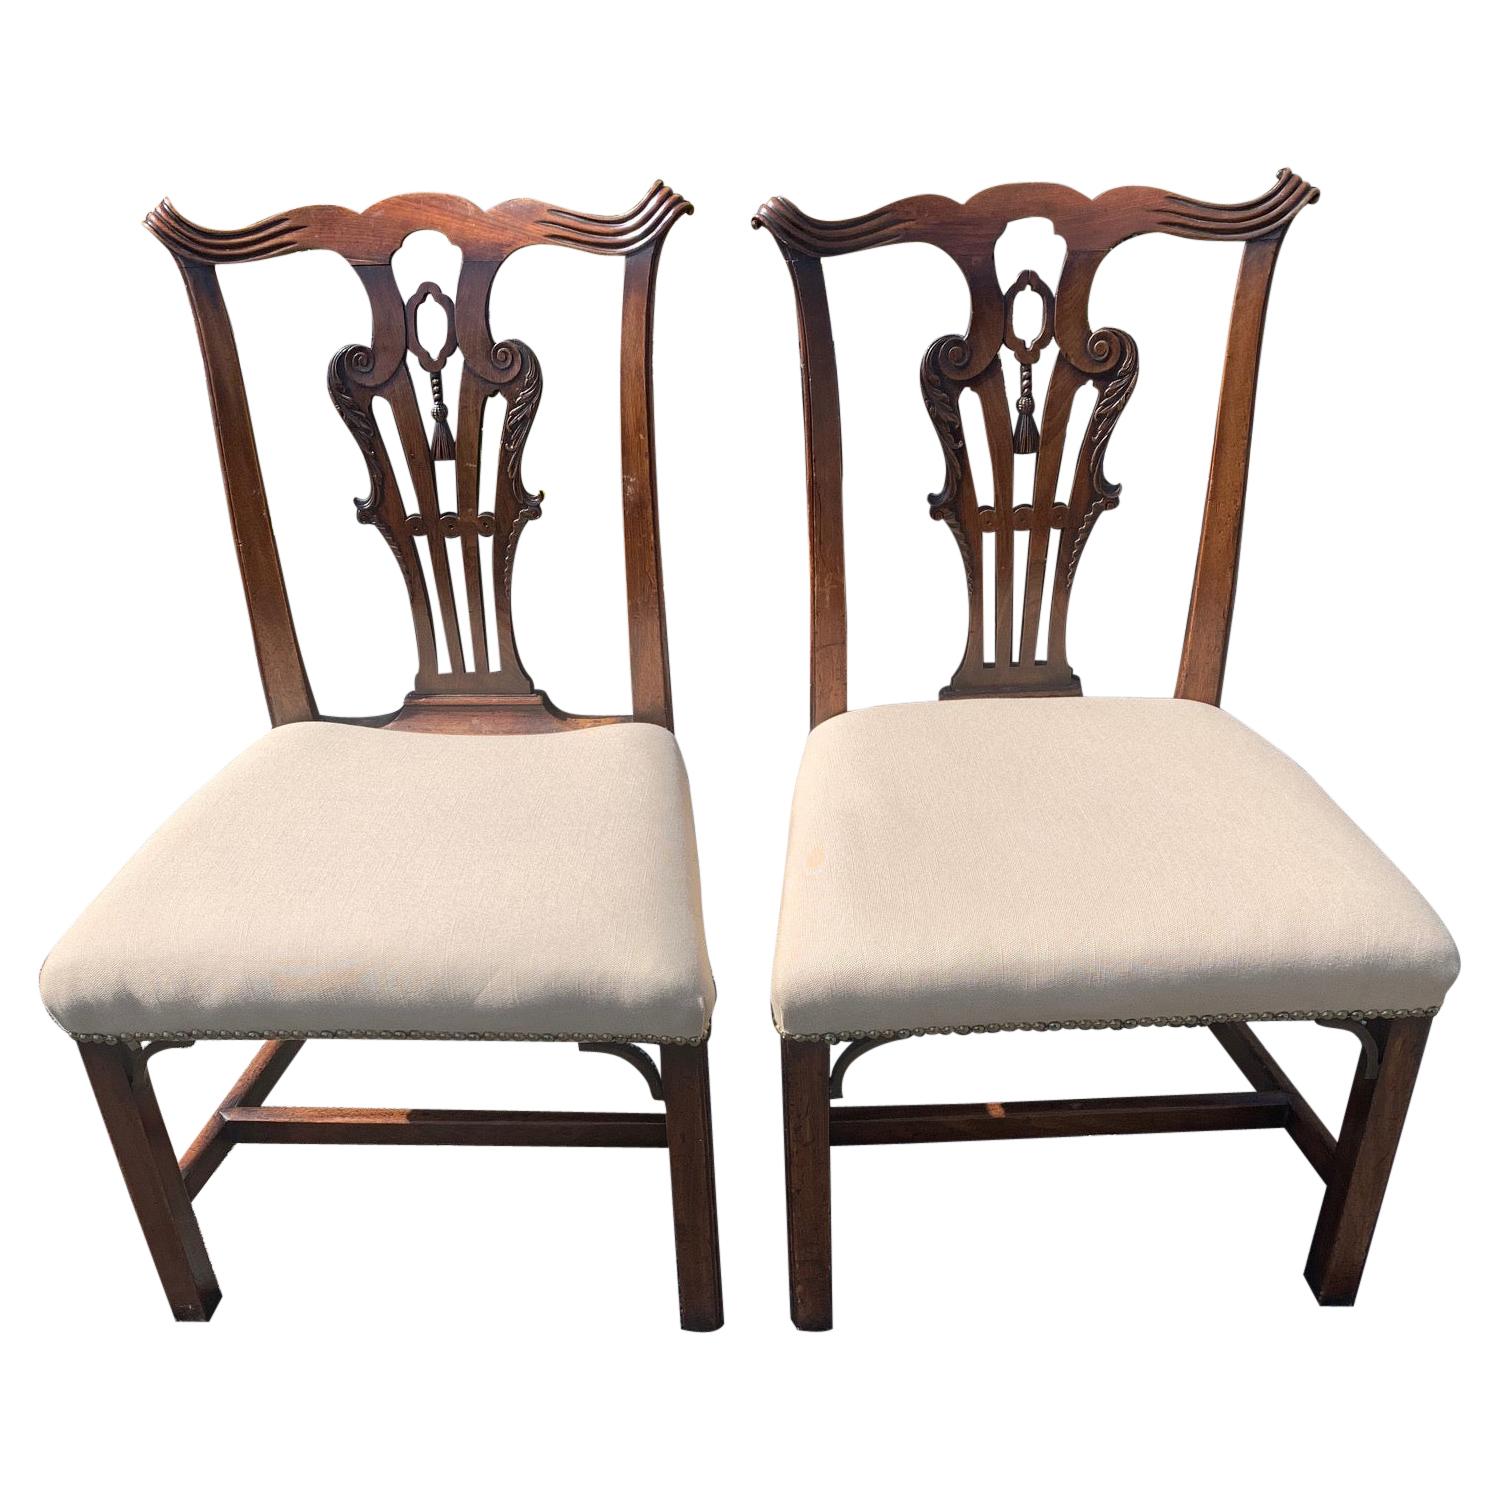 Fine Pair of 19th Century Irish Georgian Side Chairs with Center Carved Tassels